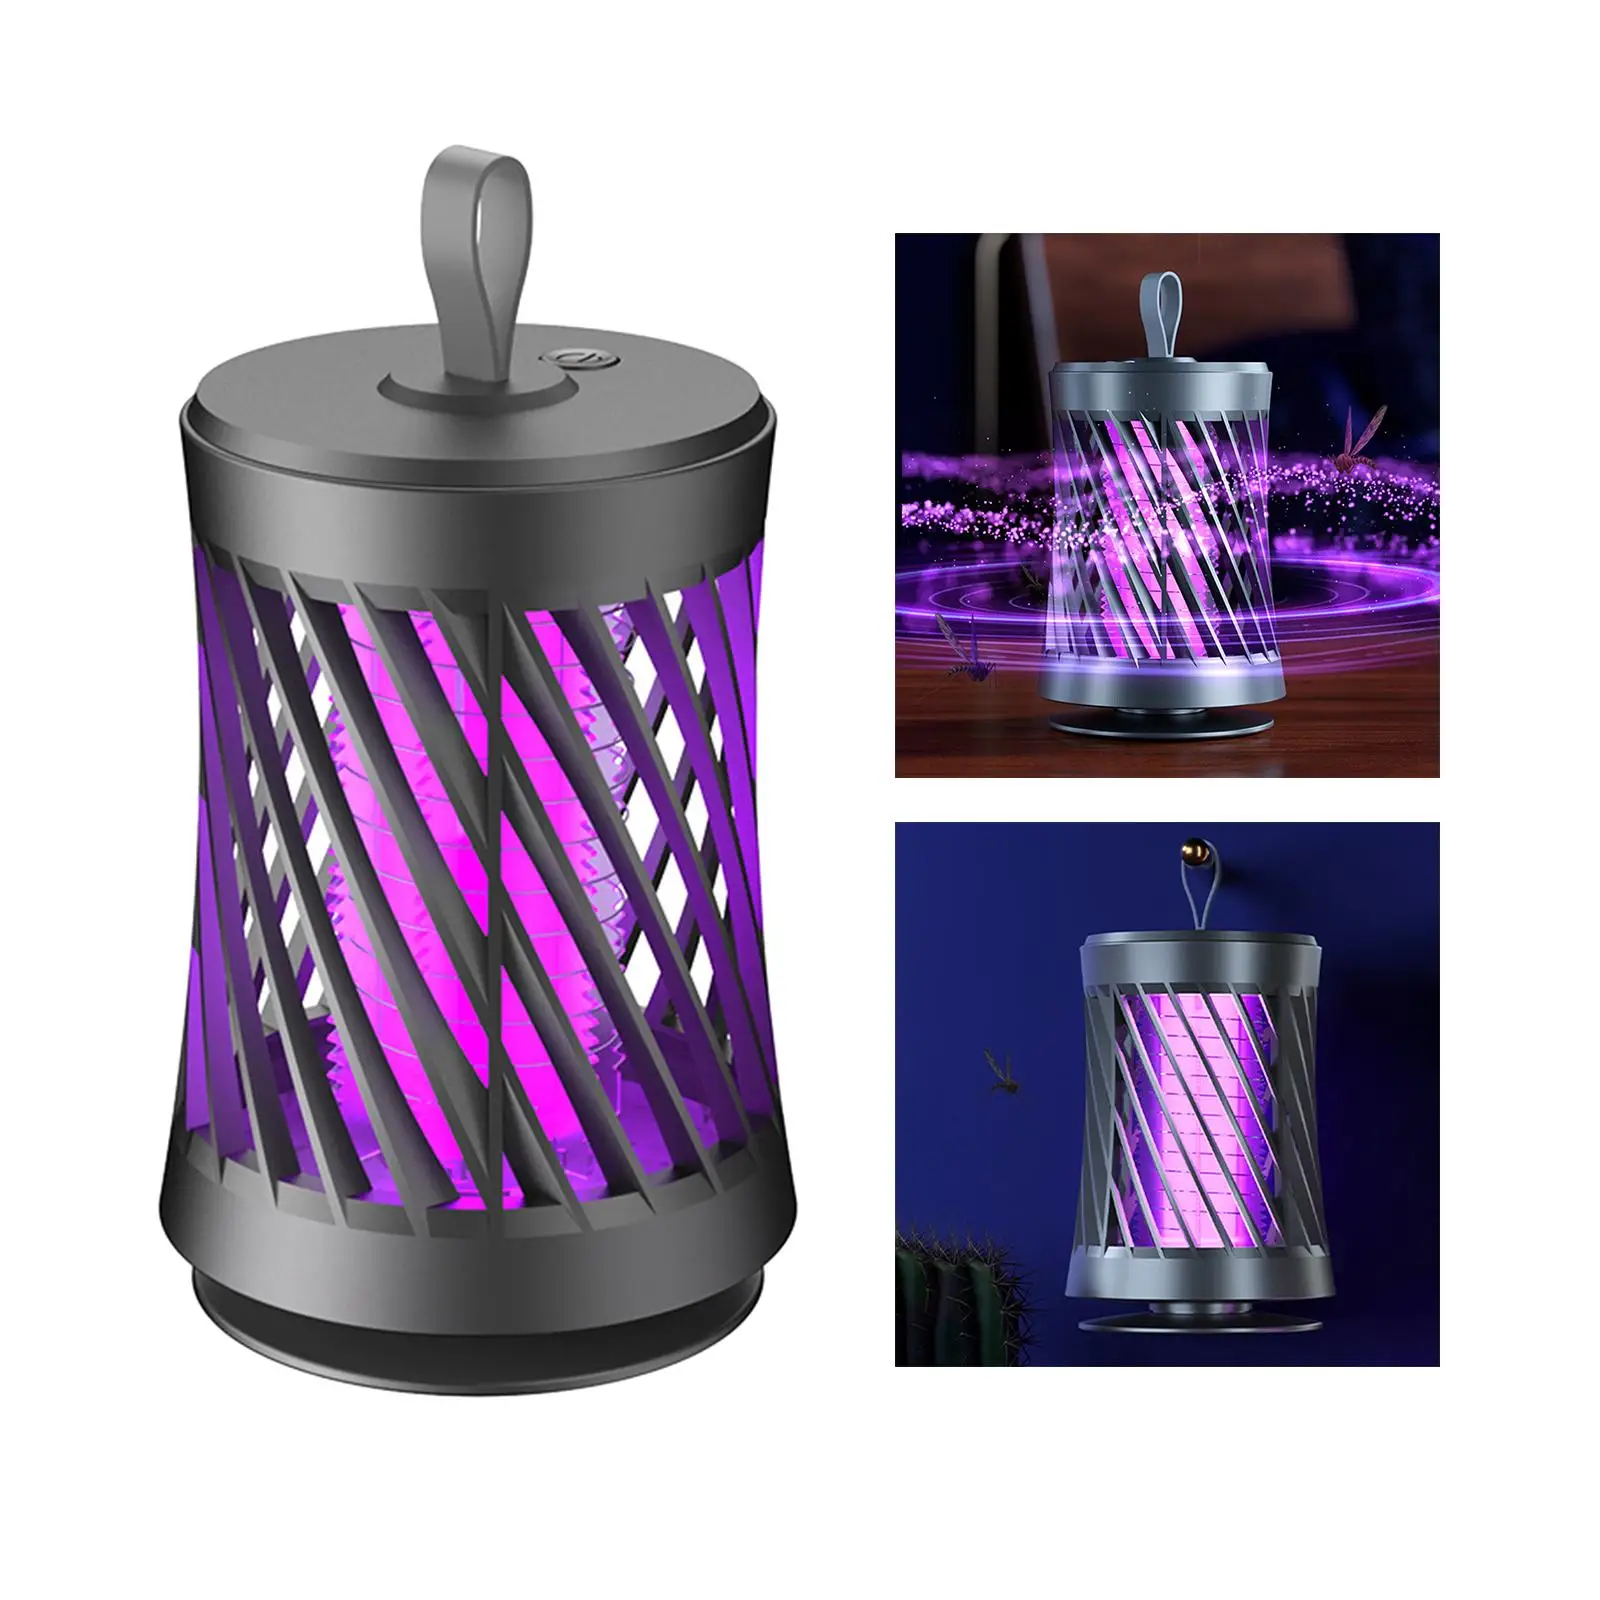 Electric Mosquito Killer Lamp UV Light Zapper Trap Insect Fly Bug Anti Mosquito for Kitchen Home Garden Patio Indoor Outdoor